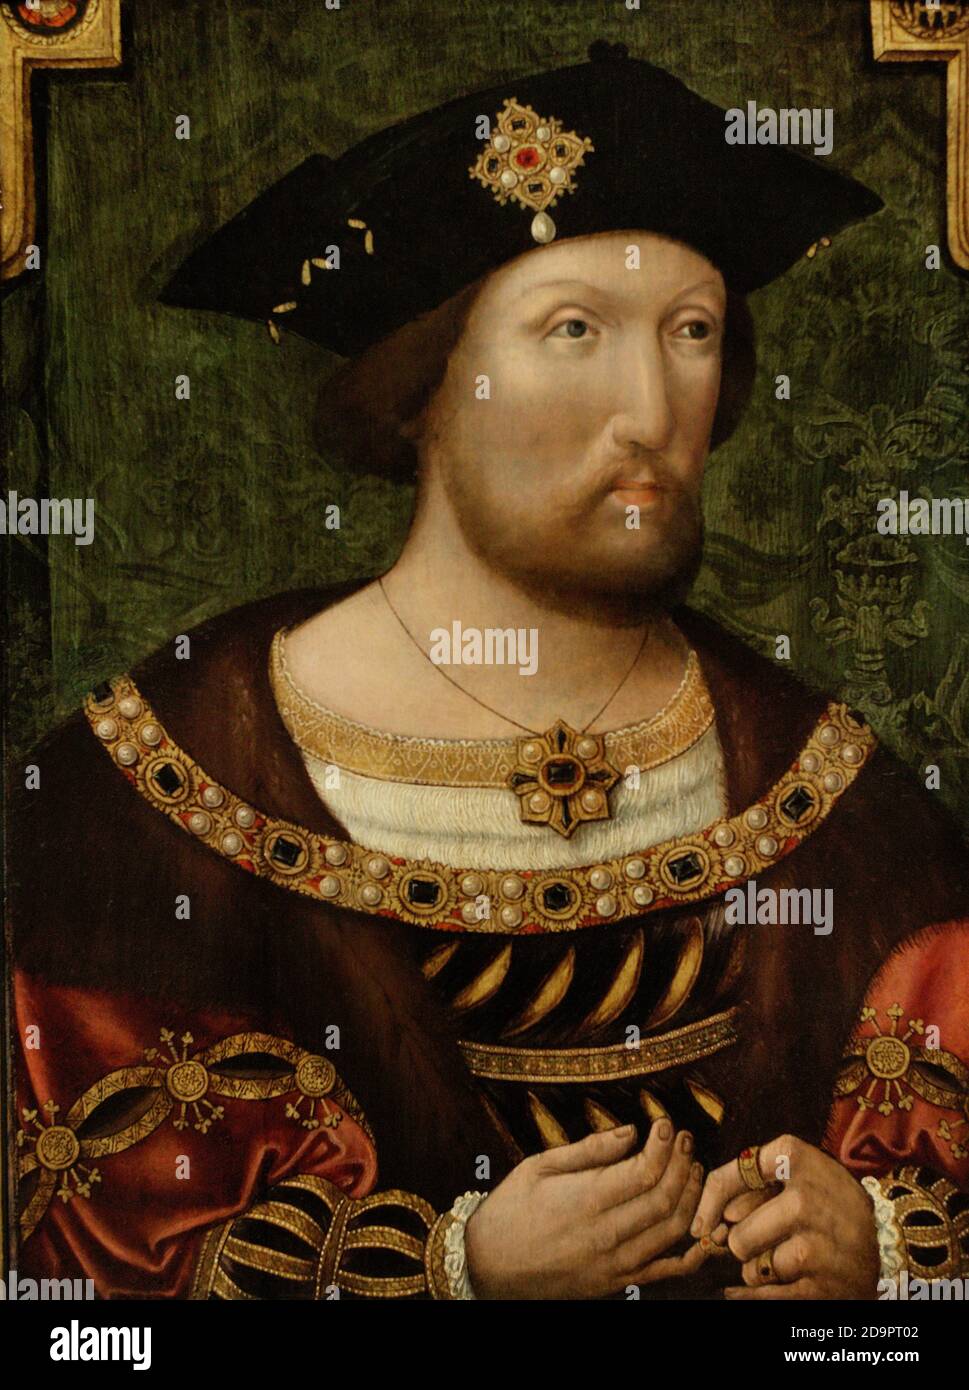 King Henry VIII (1491-1547). King of England (1509-1547). He appointed himself as head of the Church in England in place of the Pope in 1535 . Portrait by an unknown Anglo-Netherlandish artist. It shows the king placing a ring upon his right hand, a symbol of his devout piety. This painting is a version of a pre-Holbein portrait type of Henry VIII. Oil on panel (50,8 x 38,1 cm), c. 1520. National Portrait Gallery. London, England, United Kingdom. Stock Photo